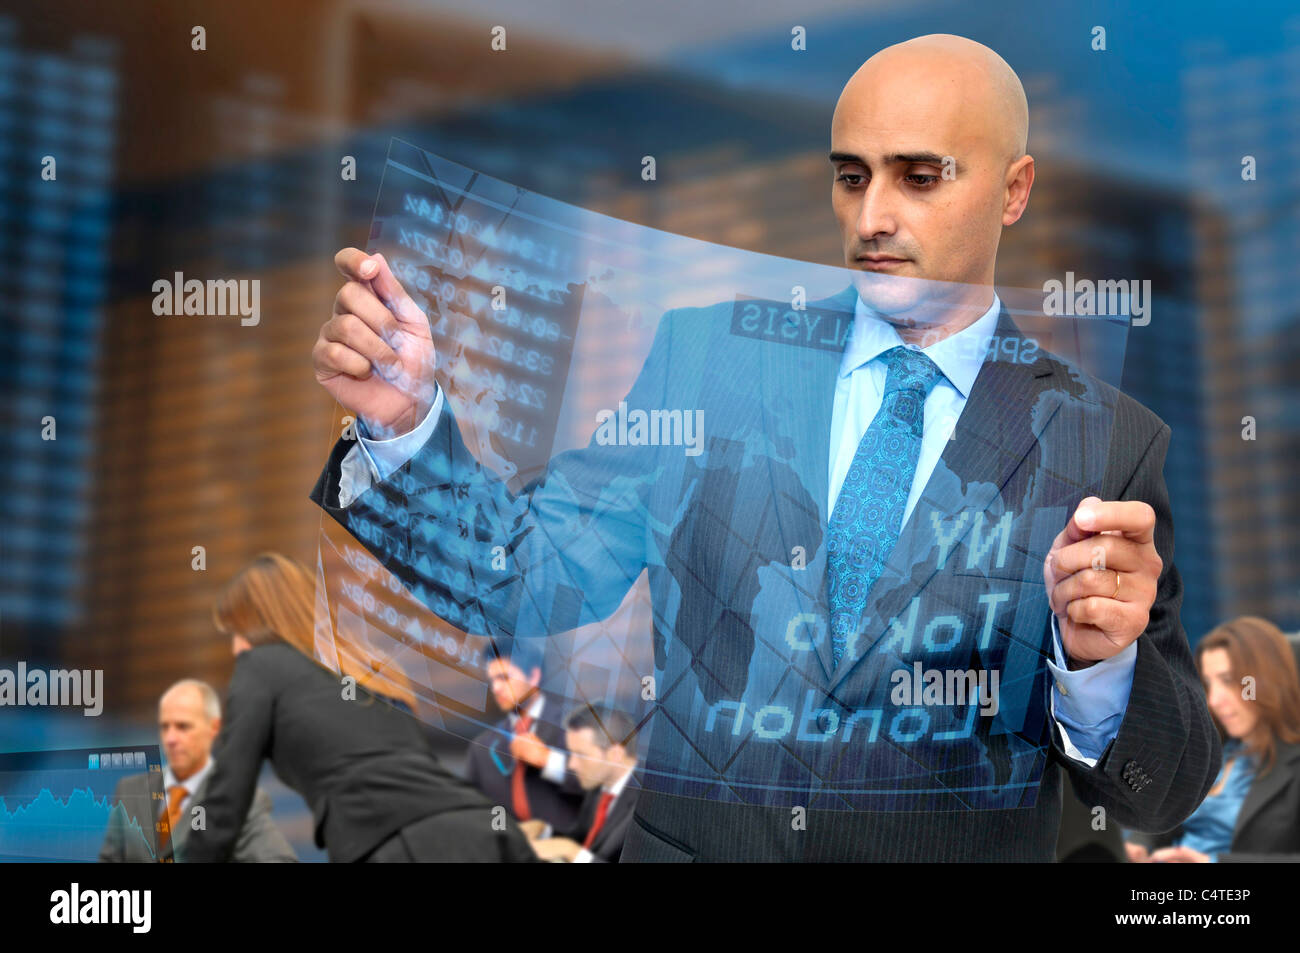 Businessman with high tech stock exchange newspaper Stock Photo